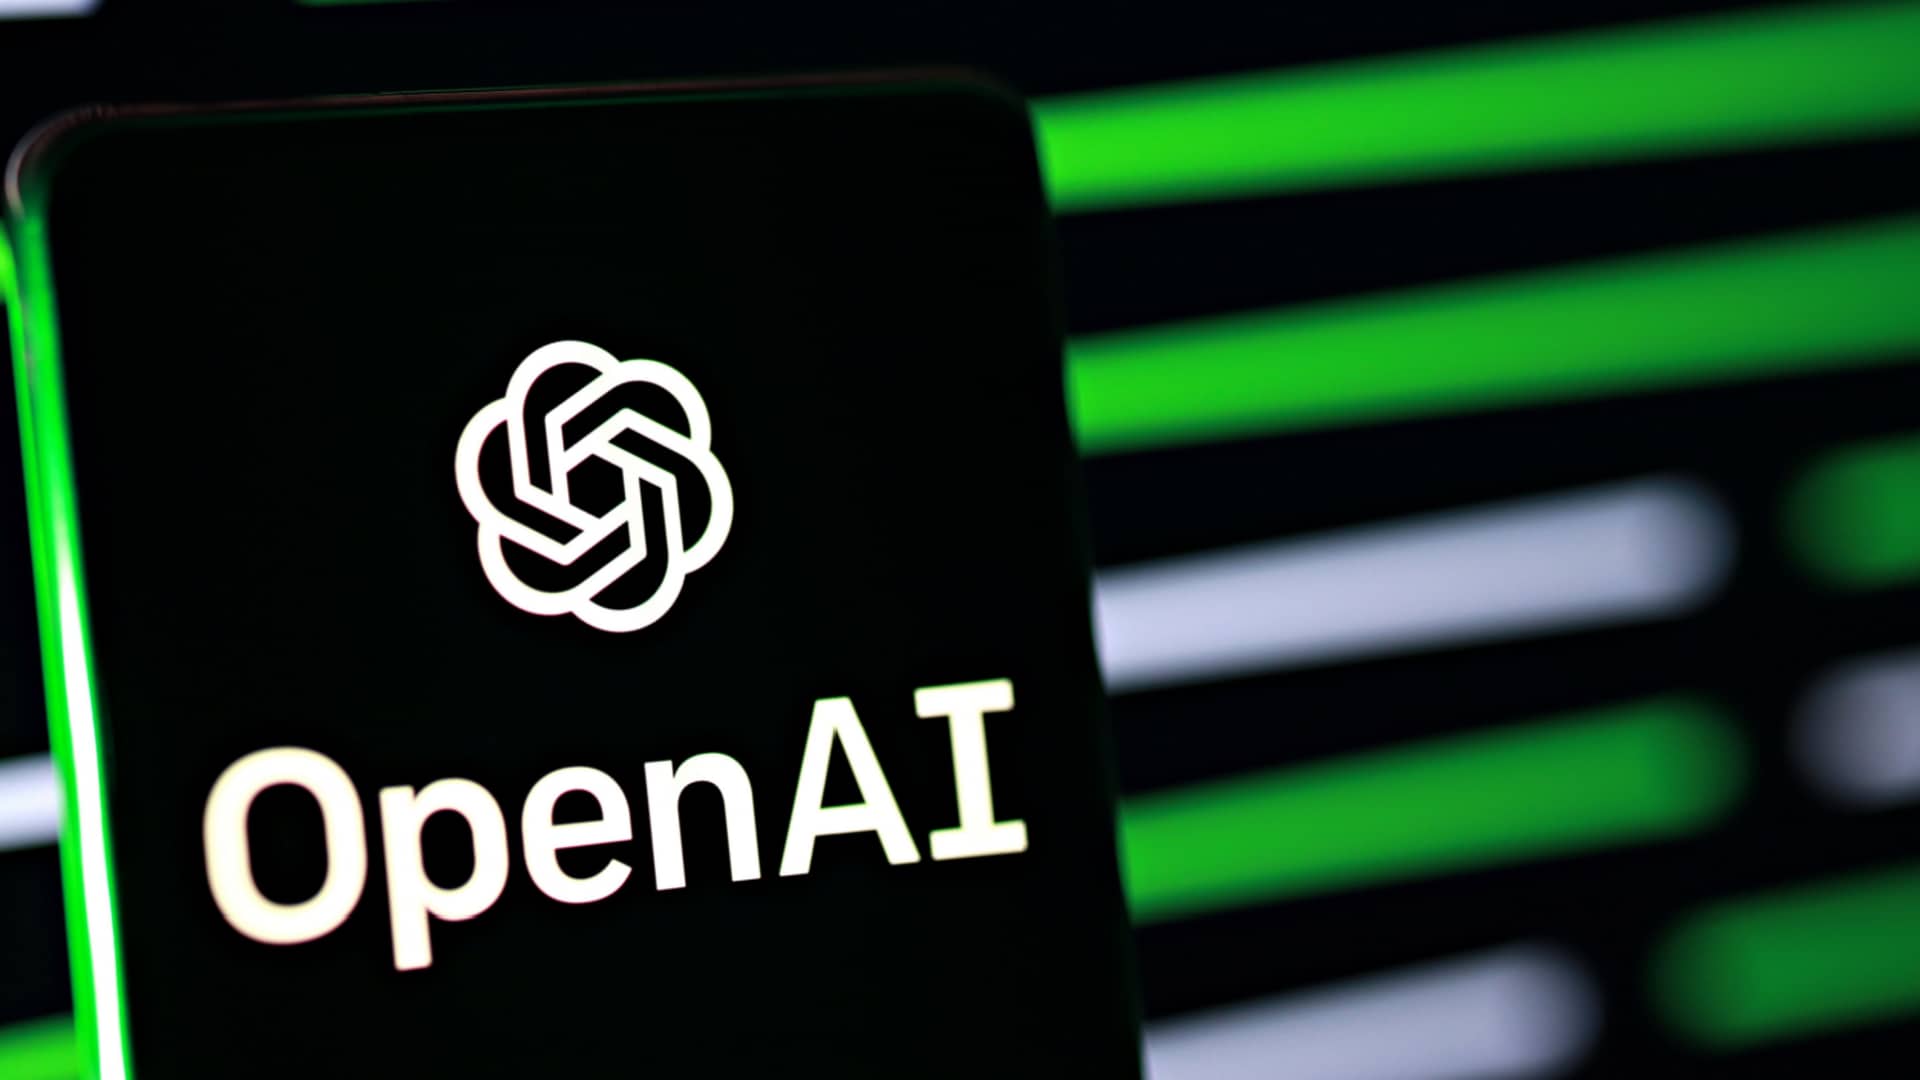 OpenAI sets up safety committee to evaluate AI models